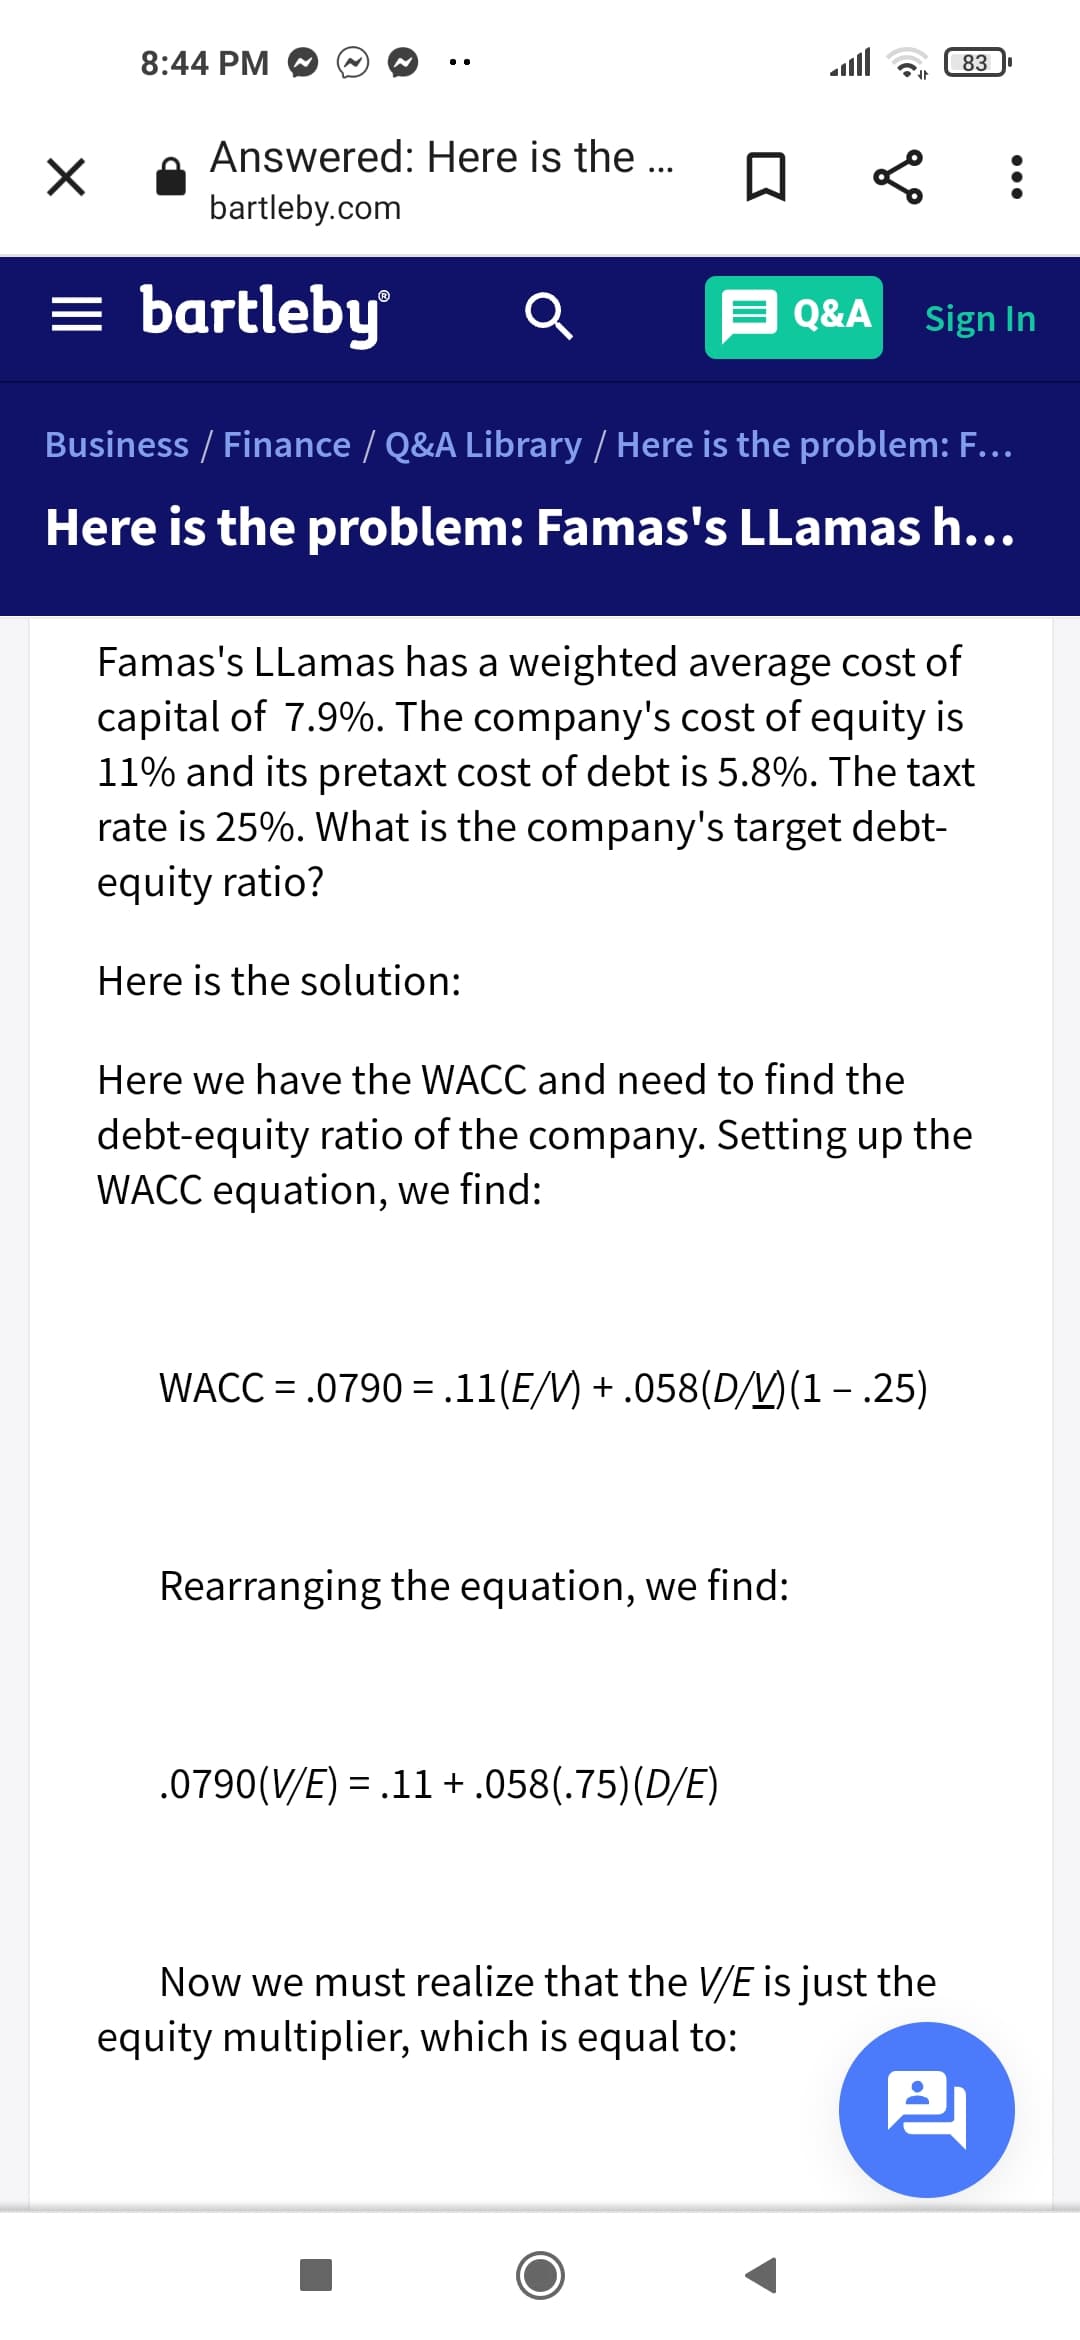 8:44 PM O
ll
83
Answered: Here is the ..
bartleby.com
= bartleby
E Q&A
Sign In
Business / Finance / Q&A Library / Here is the problem: F...
Here is the problem: Famas's LLamas h...
Famas's LLamas has a weighted average cost of
capital of 7.9%. The company's cost of equity is
11% and its pretaxt cost of debt is 5.8%. The taxt
rate is 25%. What is the company's target debt-
equity ratio?
Here is the solution:
Here we have the WACC and need to find the
debt-equity ratio of the company. Setting up the
WACC equation, we find:
WACC = .0790 =.11(E/M) + .058(D/)(1 – .25)
Rearranging the equation, we find:
.0790(V/E) = .11+.058(.75)(D/E)
%3D
Now we must realize that the V/E is just the
equity multiplier, which is equal to:
